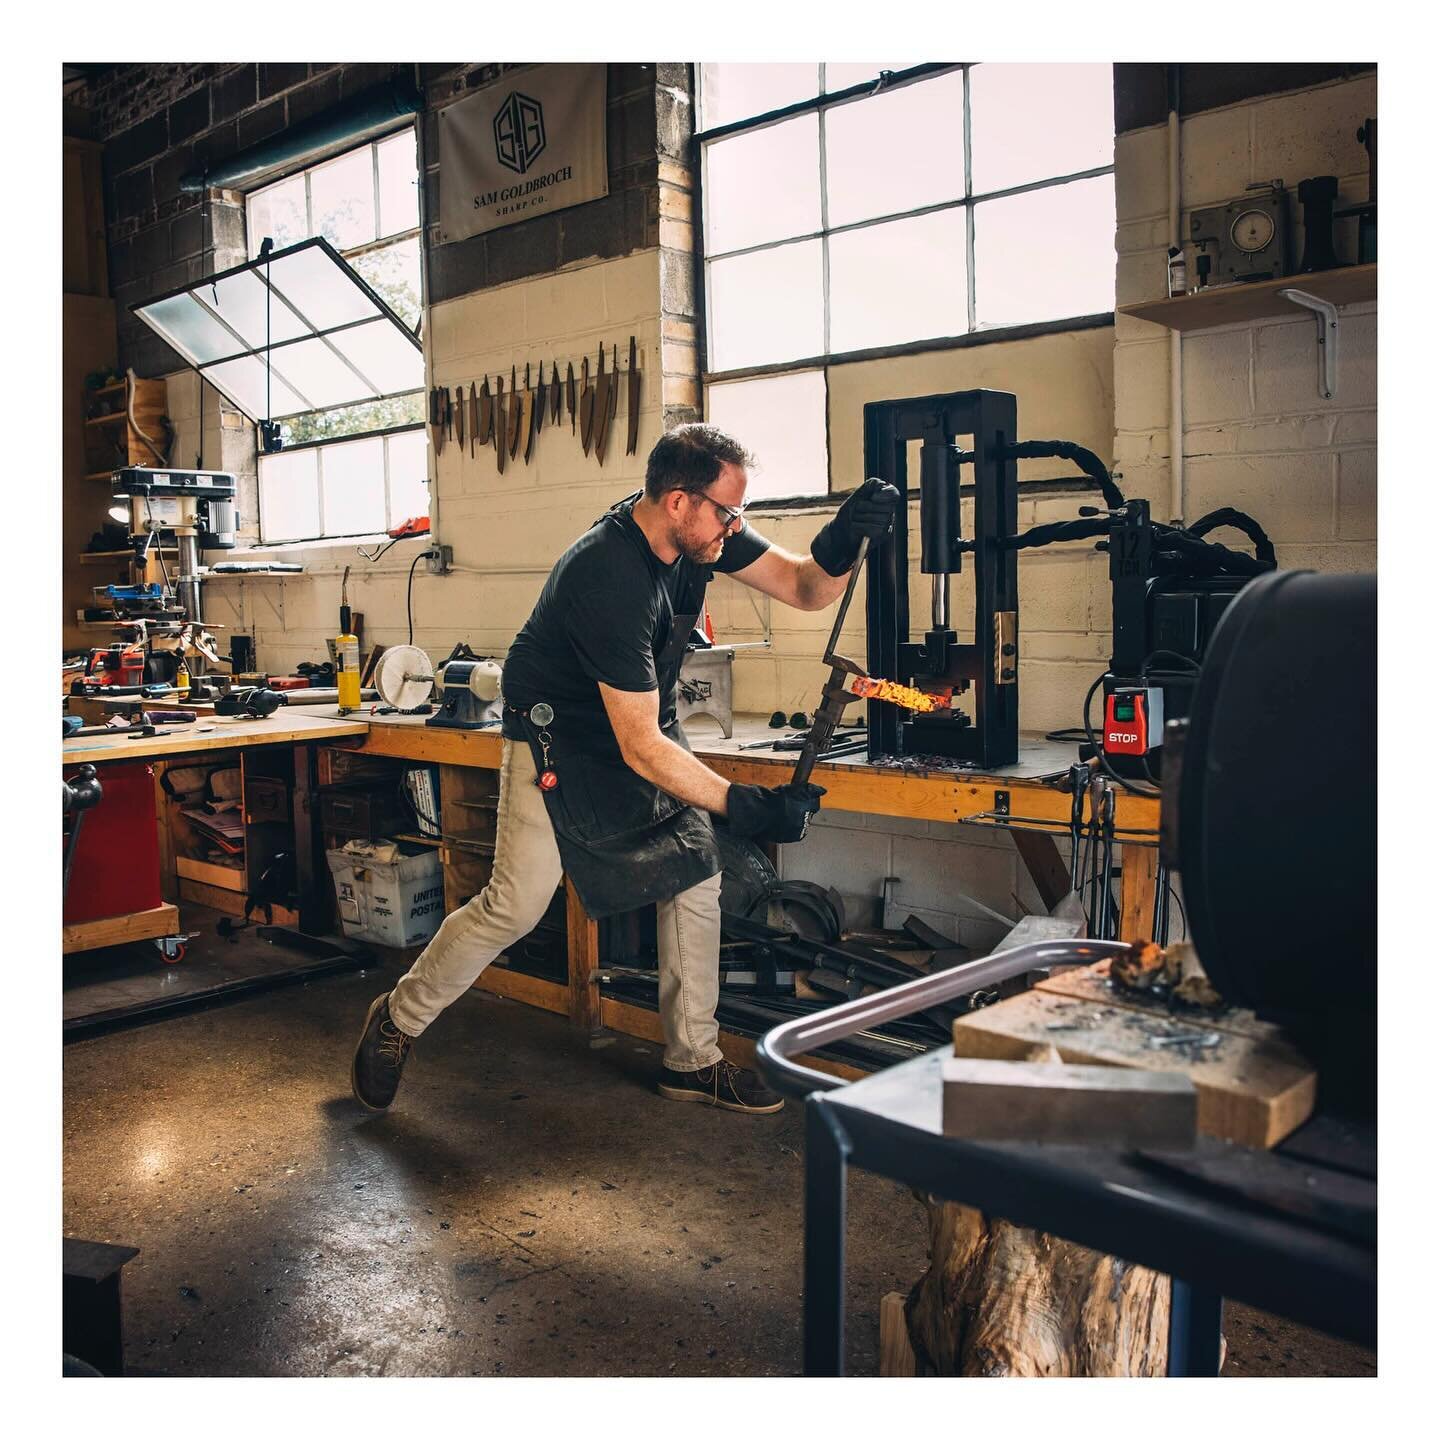 Enjoyed spending a few days with @samgoldbroch in his workspace as he hand made a beautiful Damascus knife from scratch! ✨🔪✨

Thanks for @thephotopersuasion for the assignment covering this fun piece for @chicagomag 

Click the link in bio to peep t